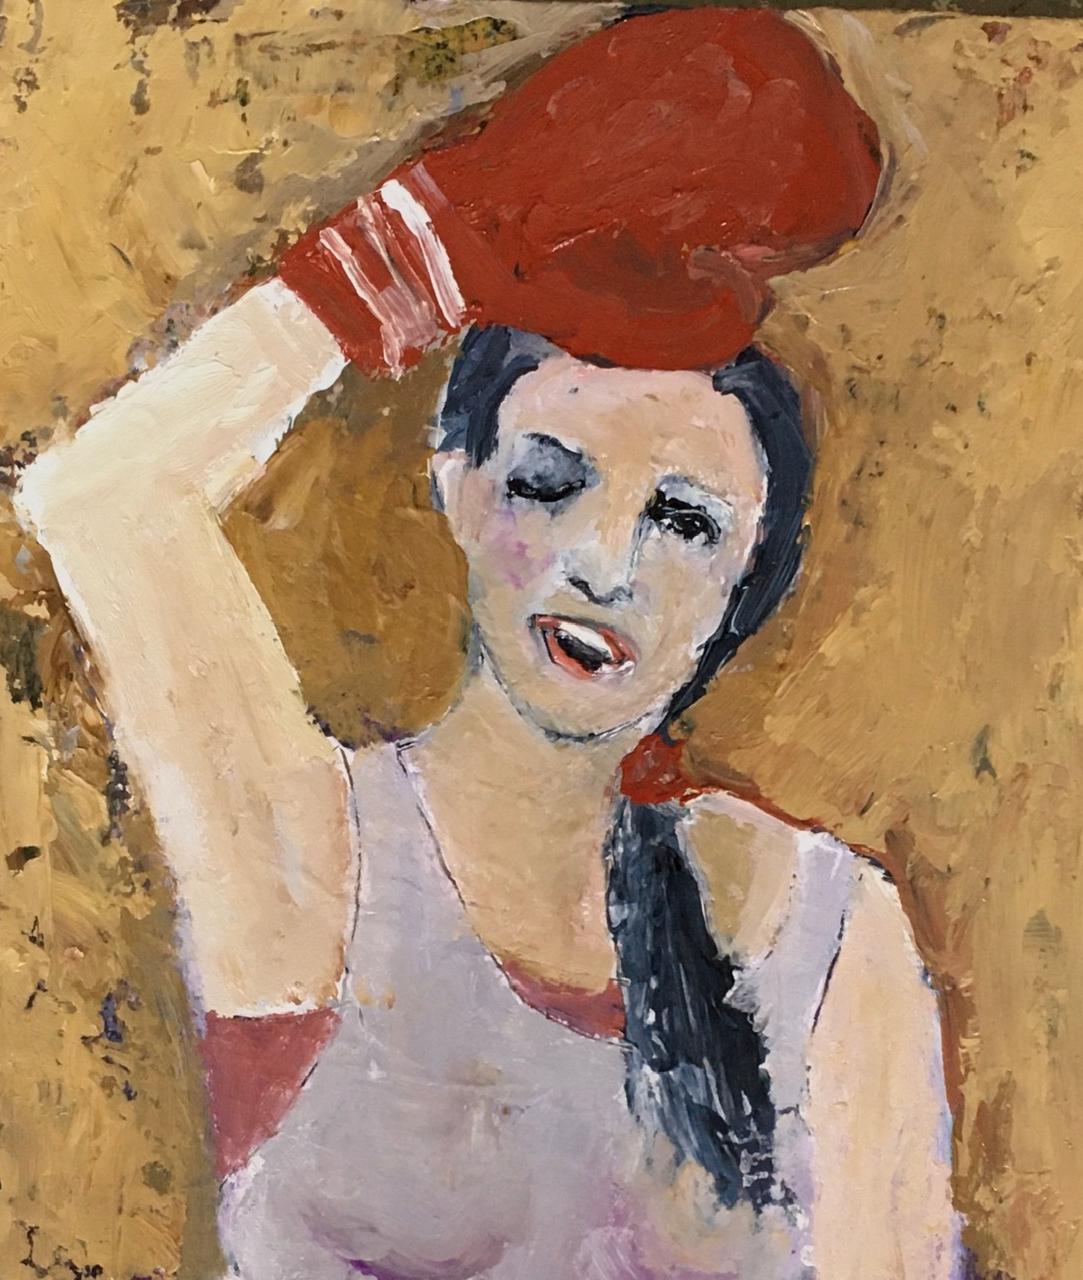 You Should Have seen the Other Gal By Jeanie Tomanek is an 8